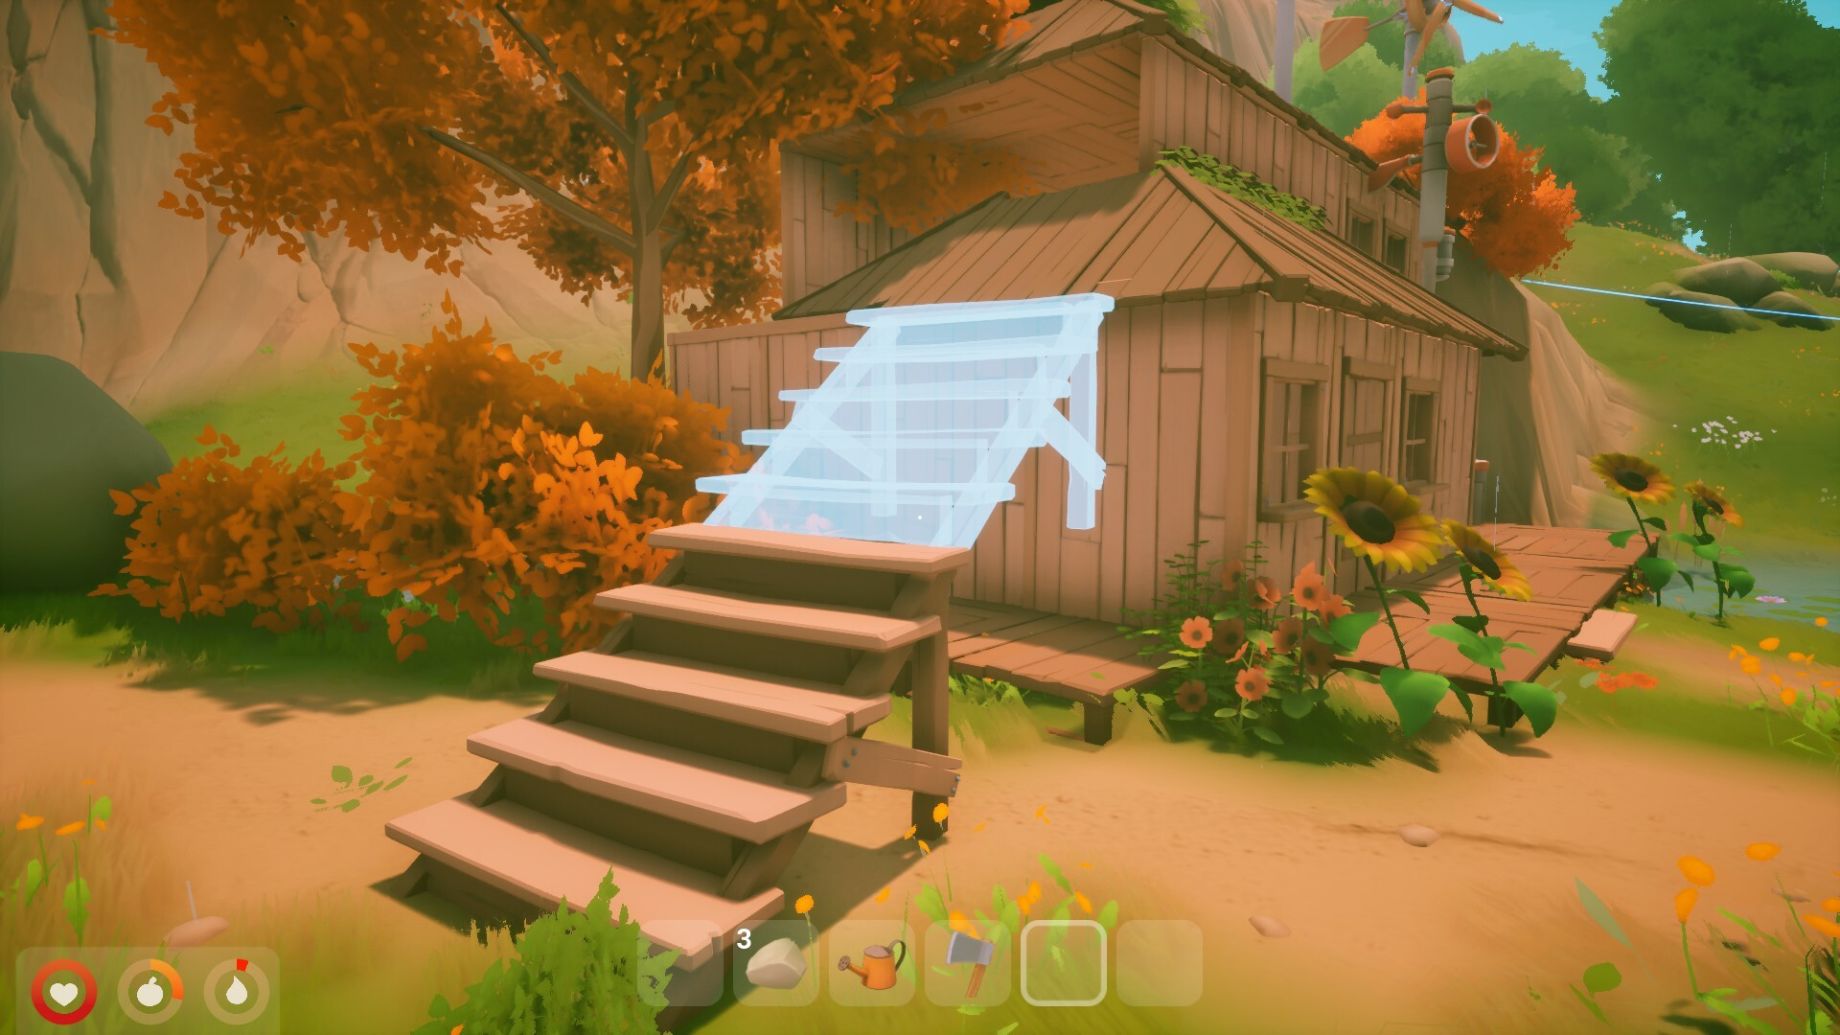 Solarpunk is an upcoming cozy survival (currently in development) 🚀🌱, Cozy Game